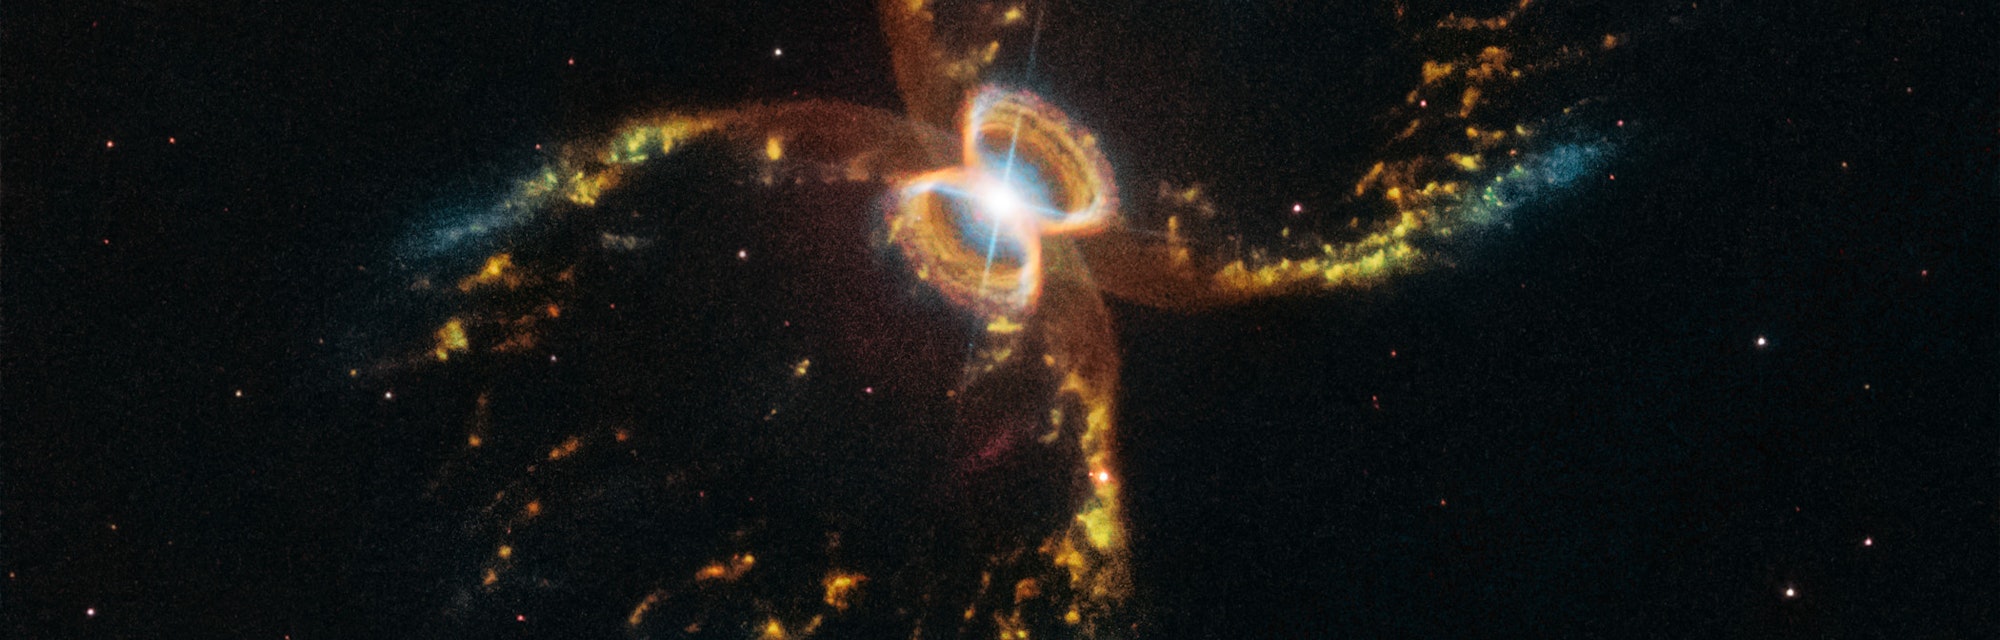 hubble image of the southern crab nebula, which has two lobes